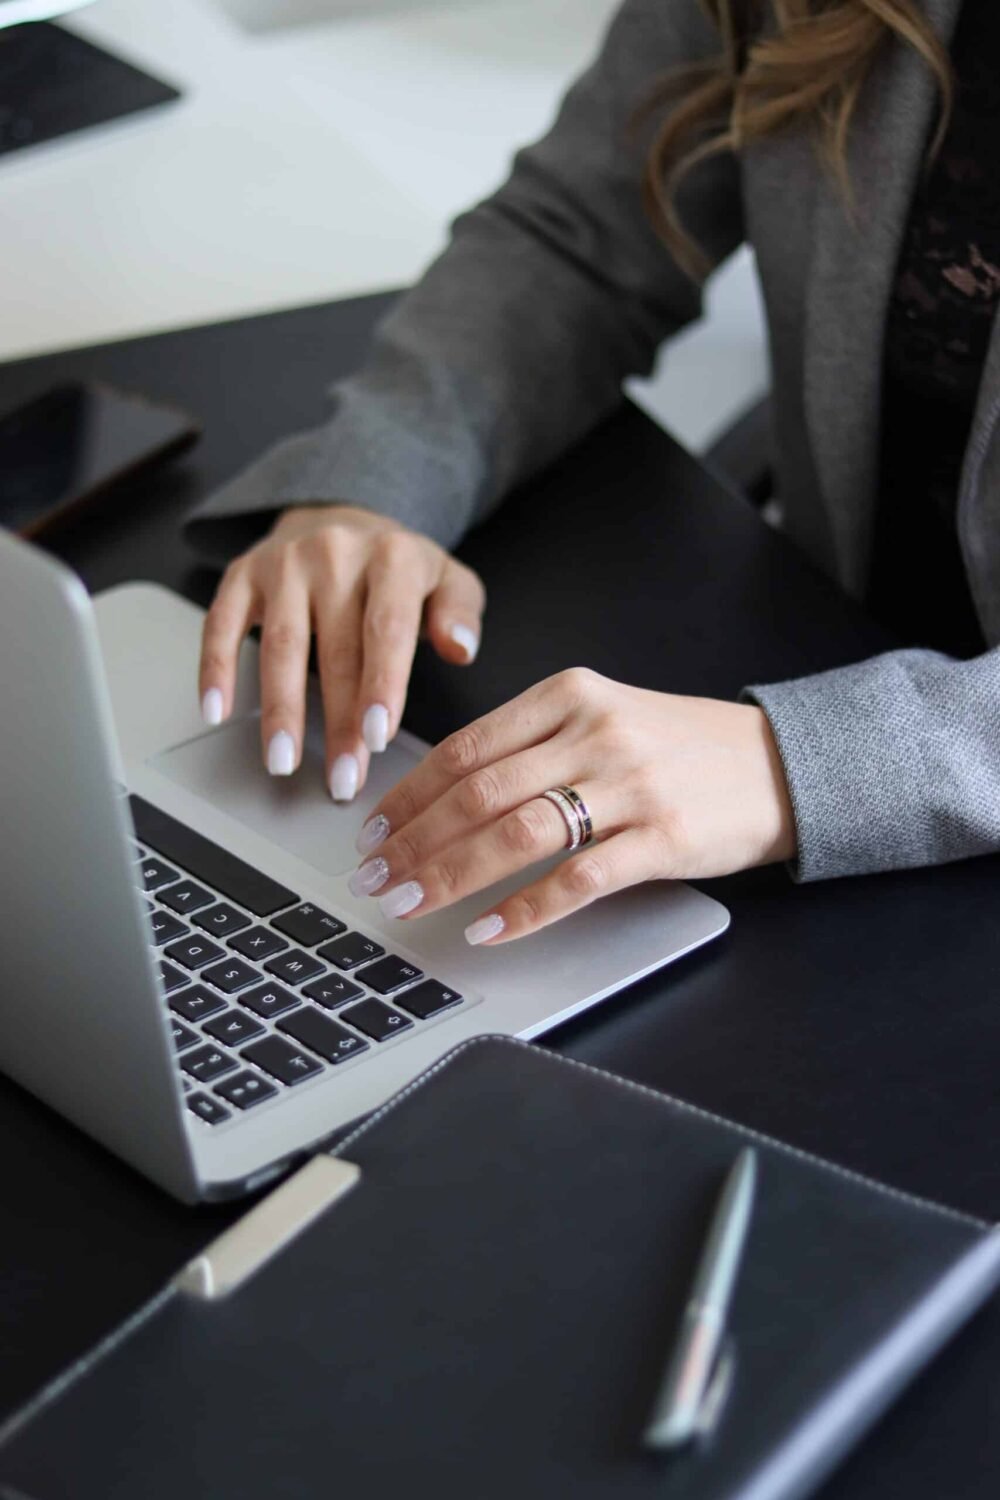 A person in a gray blazer typing on a laptop at a black desk, with a notebook and pen nearby, working to boost your website's SEO. Only their hands and arms are visible.